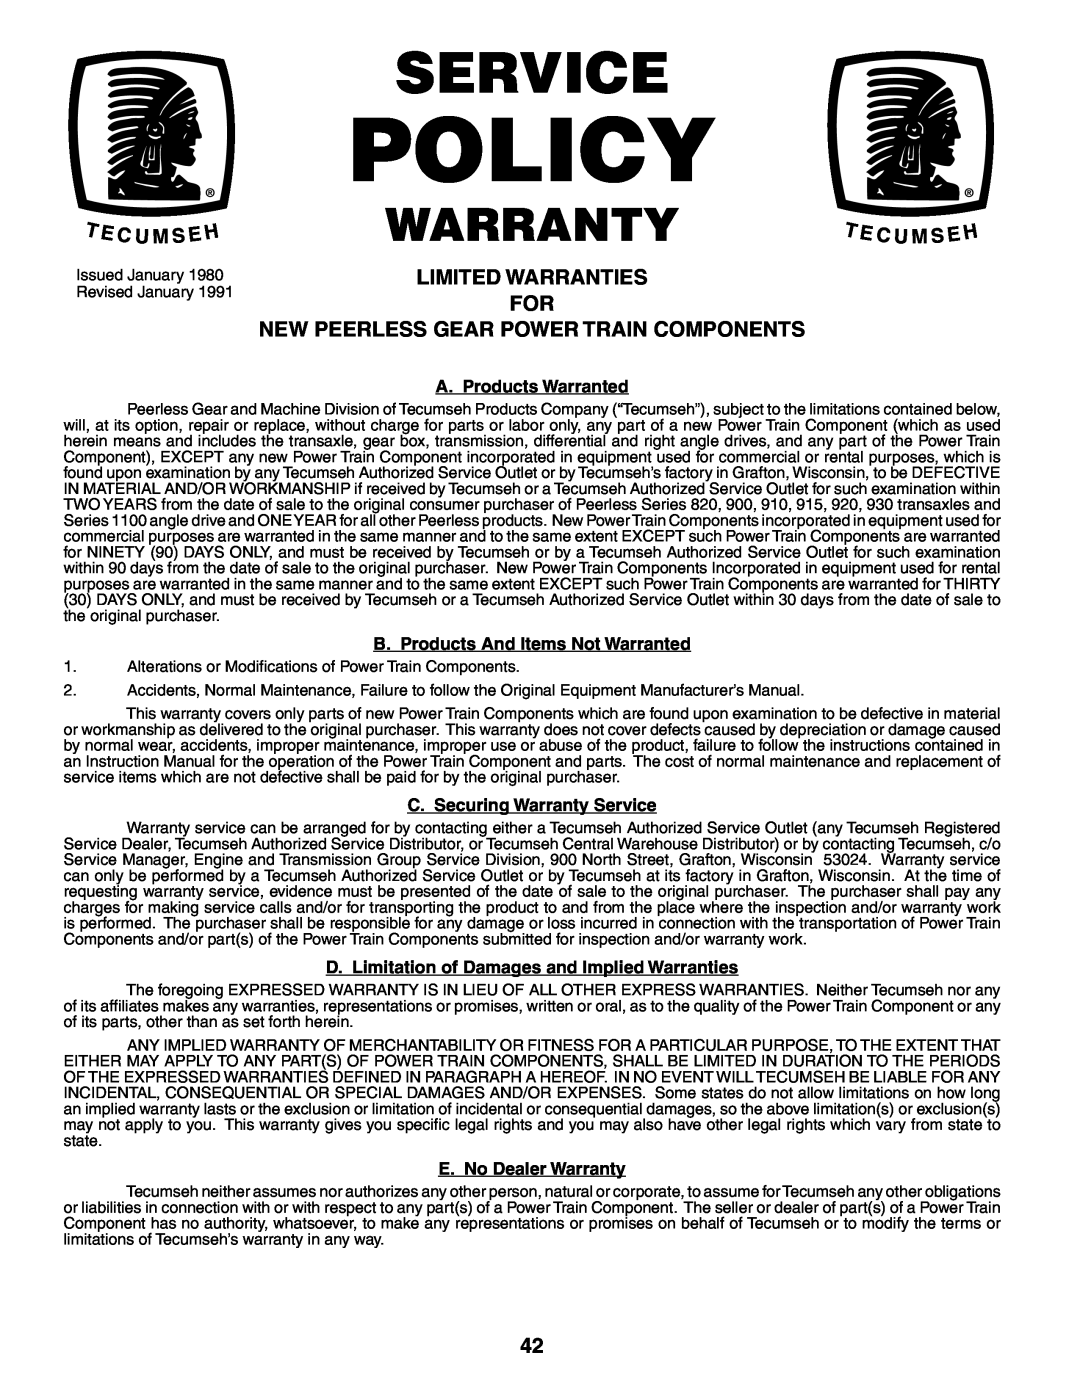 Husqvarna LT1536 owner manual Limited Warranties For New Peerless Gear Power Train Components, Policy, Service, Warranty 